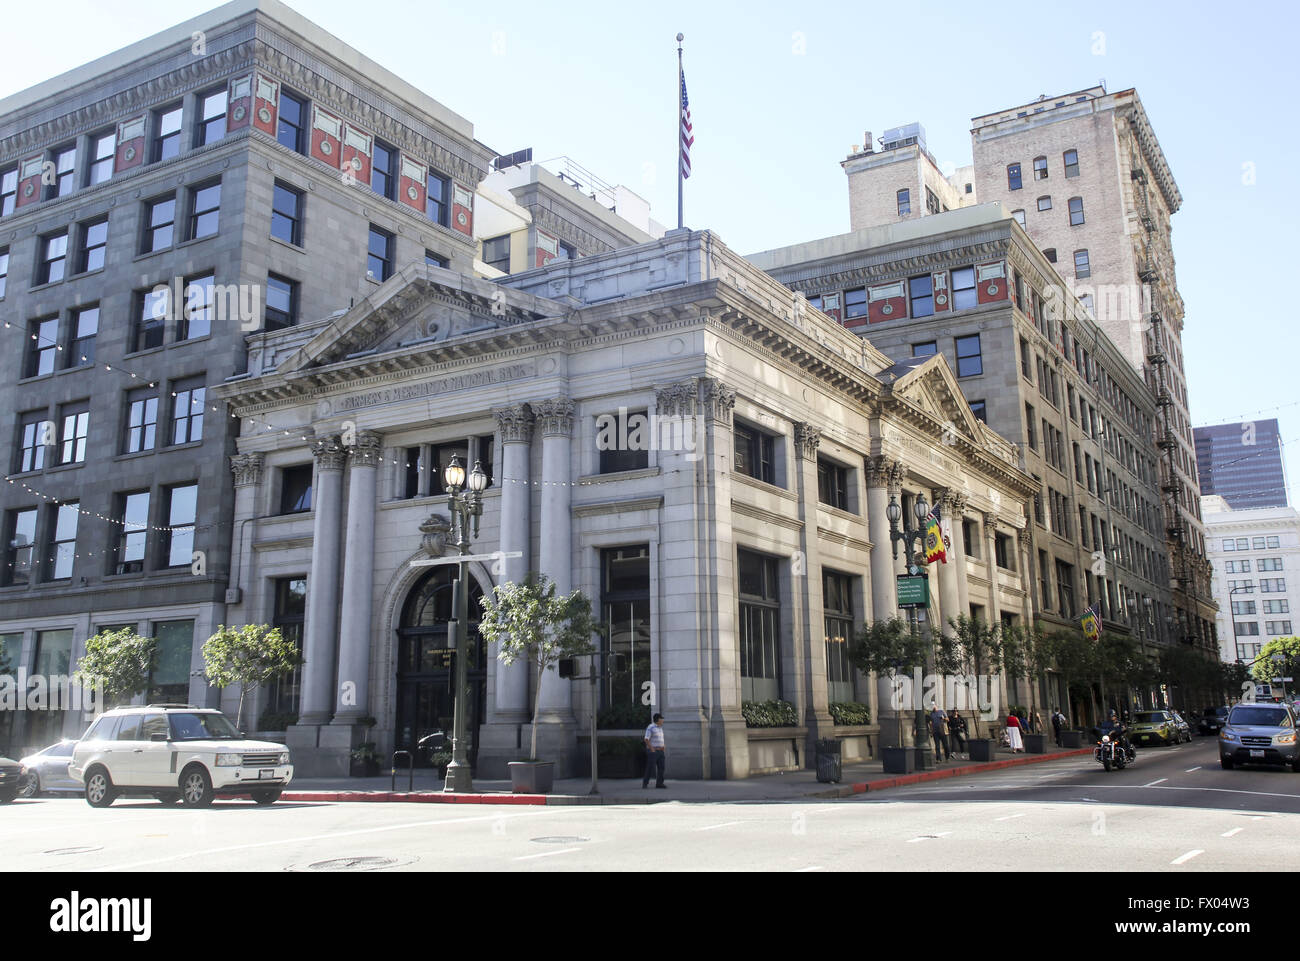 Los Angeles, California, USA. 15th Feb, 2016. Farmers and Merchants National Bank at 401 S. Main St. in downtown Los Angeles.(Photo by Ringo Chiu/PHOTOFORMULA.com).Usage Notes: This content is intended for editorial use only. For other uses, additional clearances may be required. © Ringo Chiu/ZUMA Wire/Alamy Live News Stock Photo